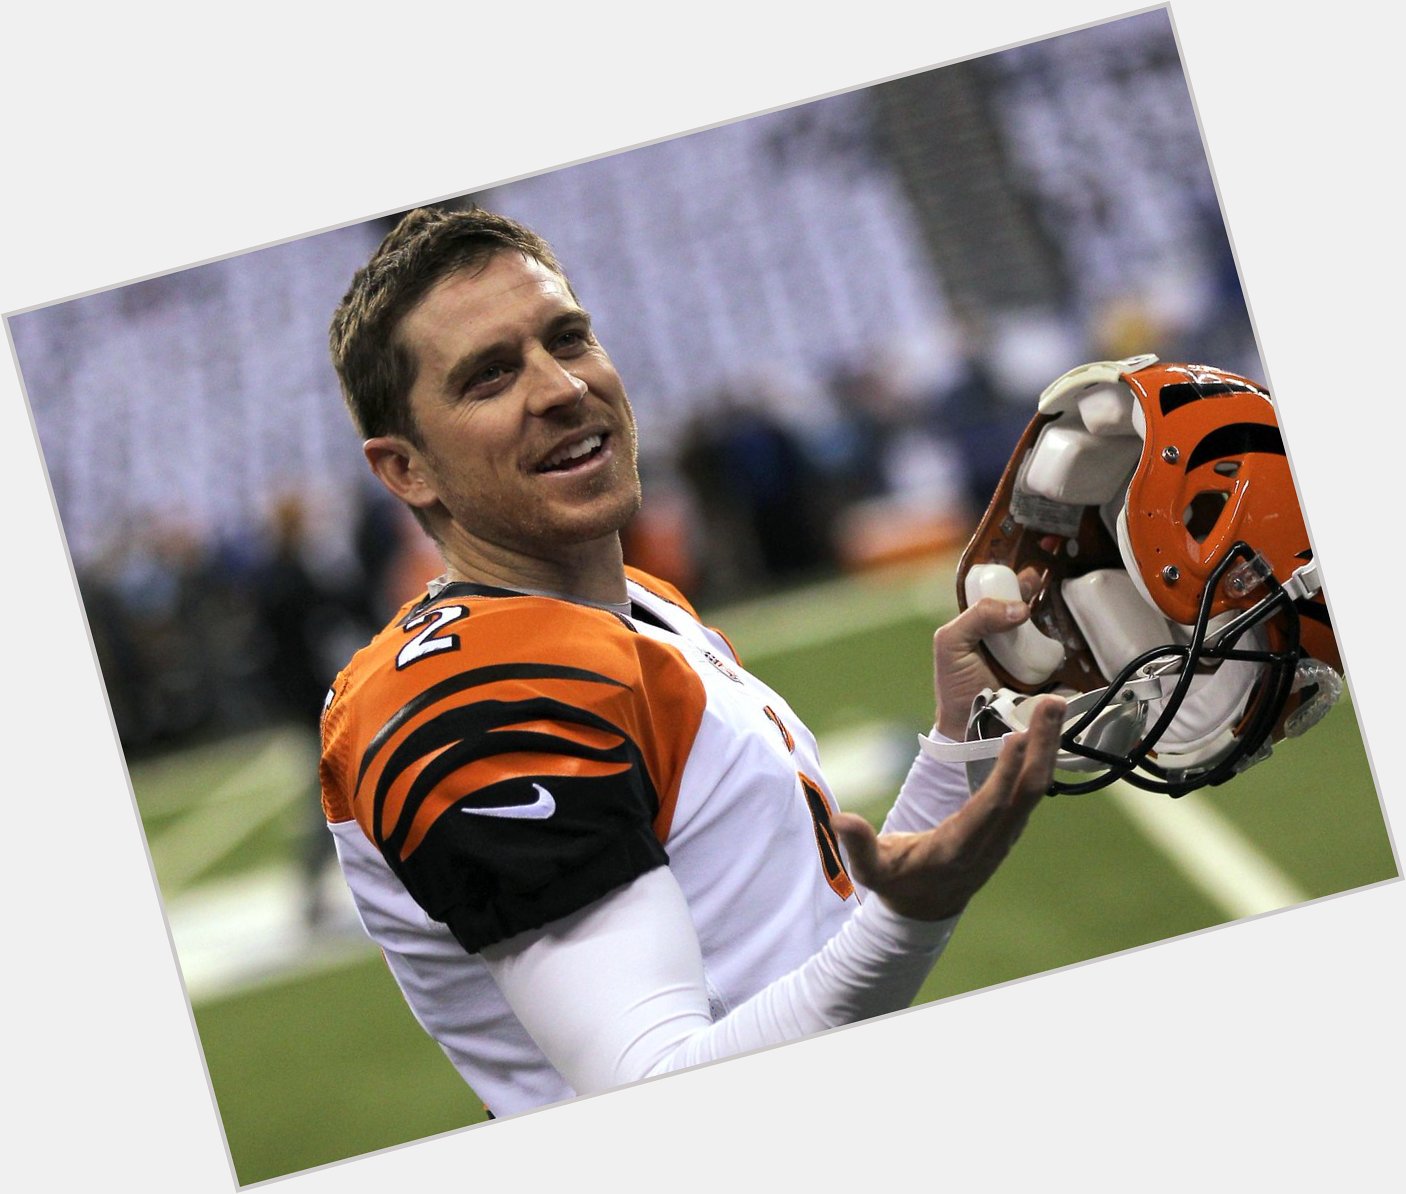 Happy 33rd birthday to kicker Mike Nugent 